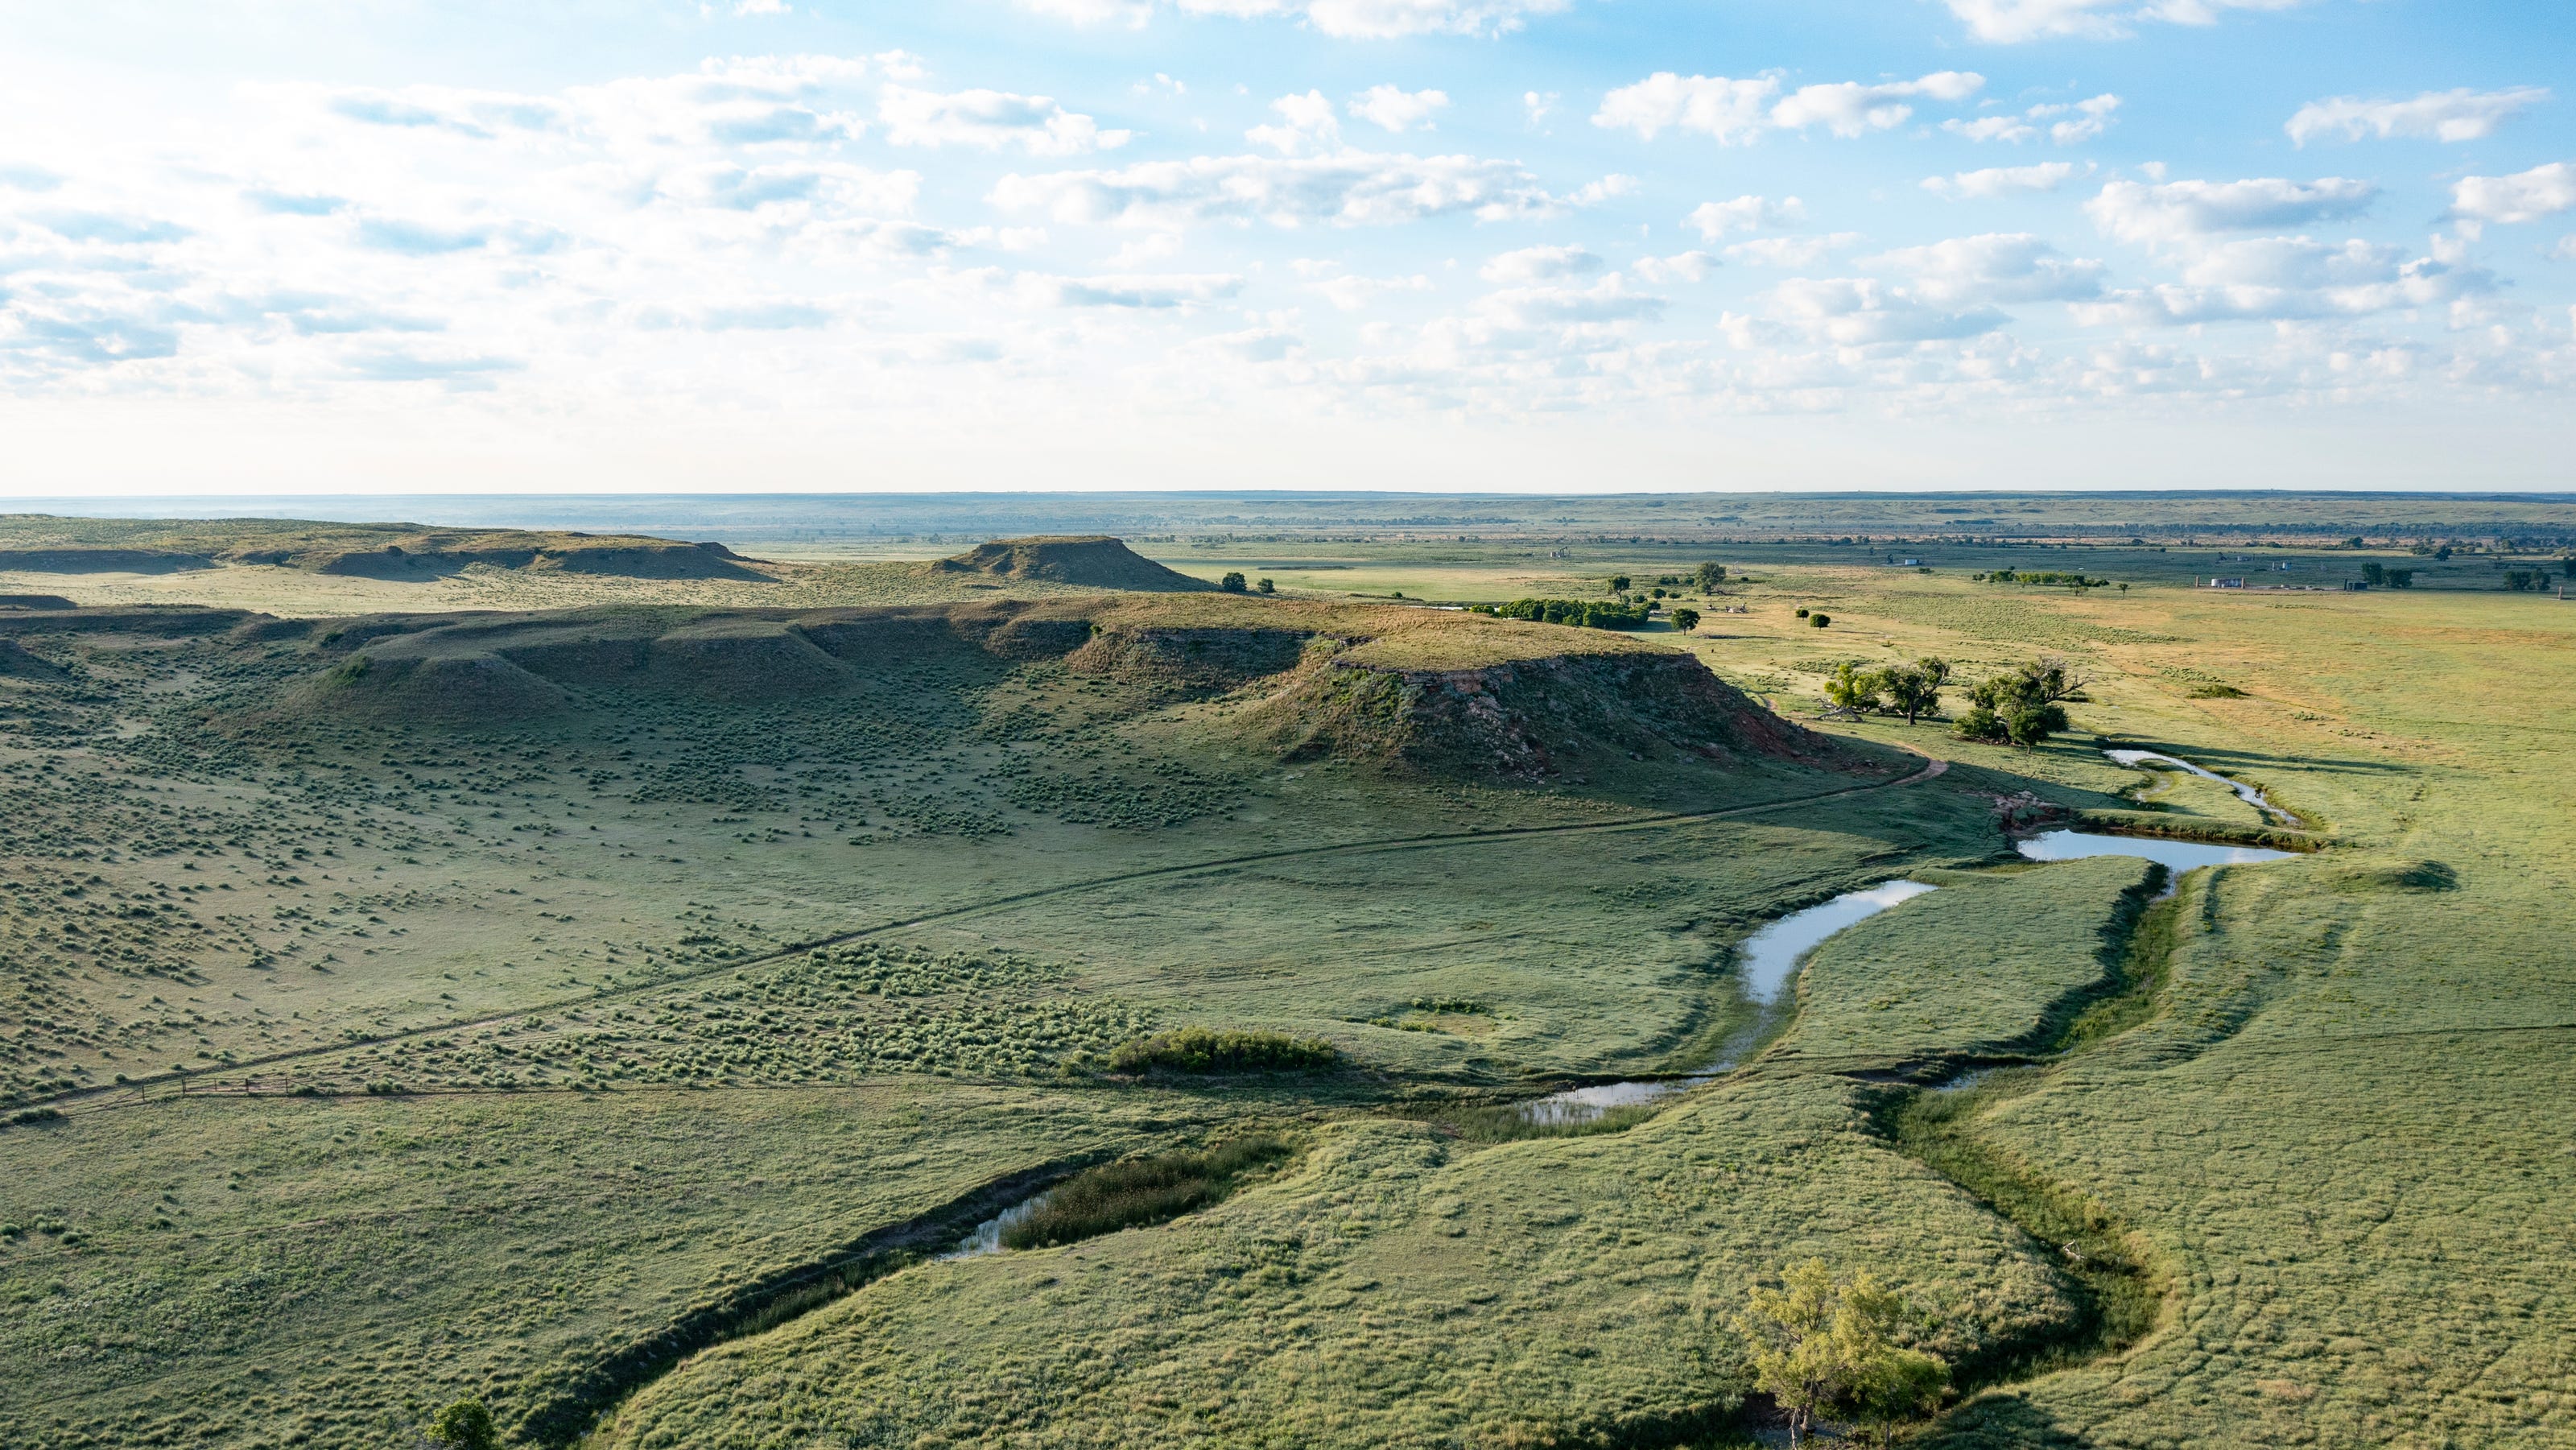 Iconic Turkey Track Ranch with 80,000 acres in Texas Panhandle could be yours for $200M - LubbockOnline.com